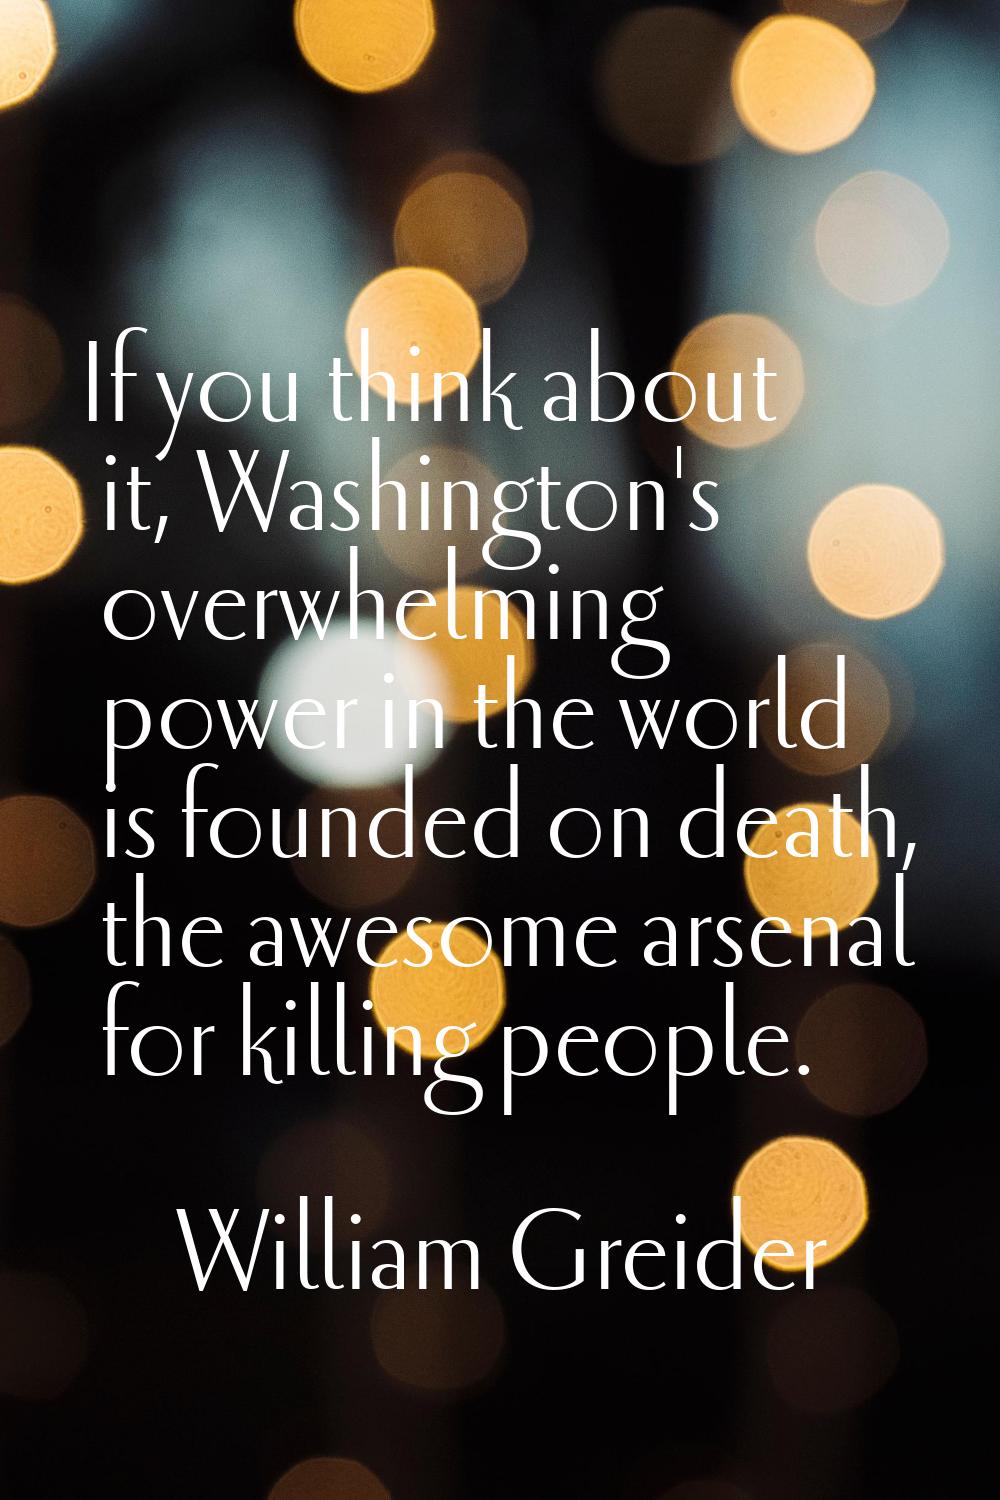 If you think about it, Washington's overwhelming power in the world is founded on death, the awesom